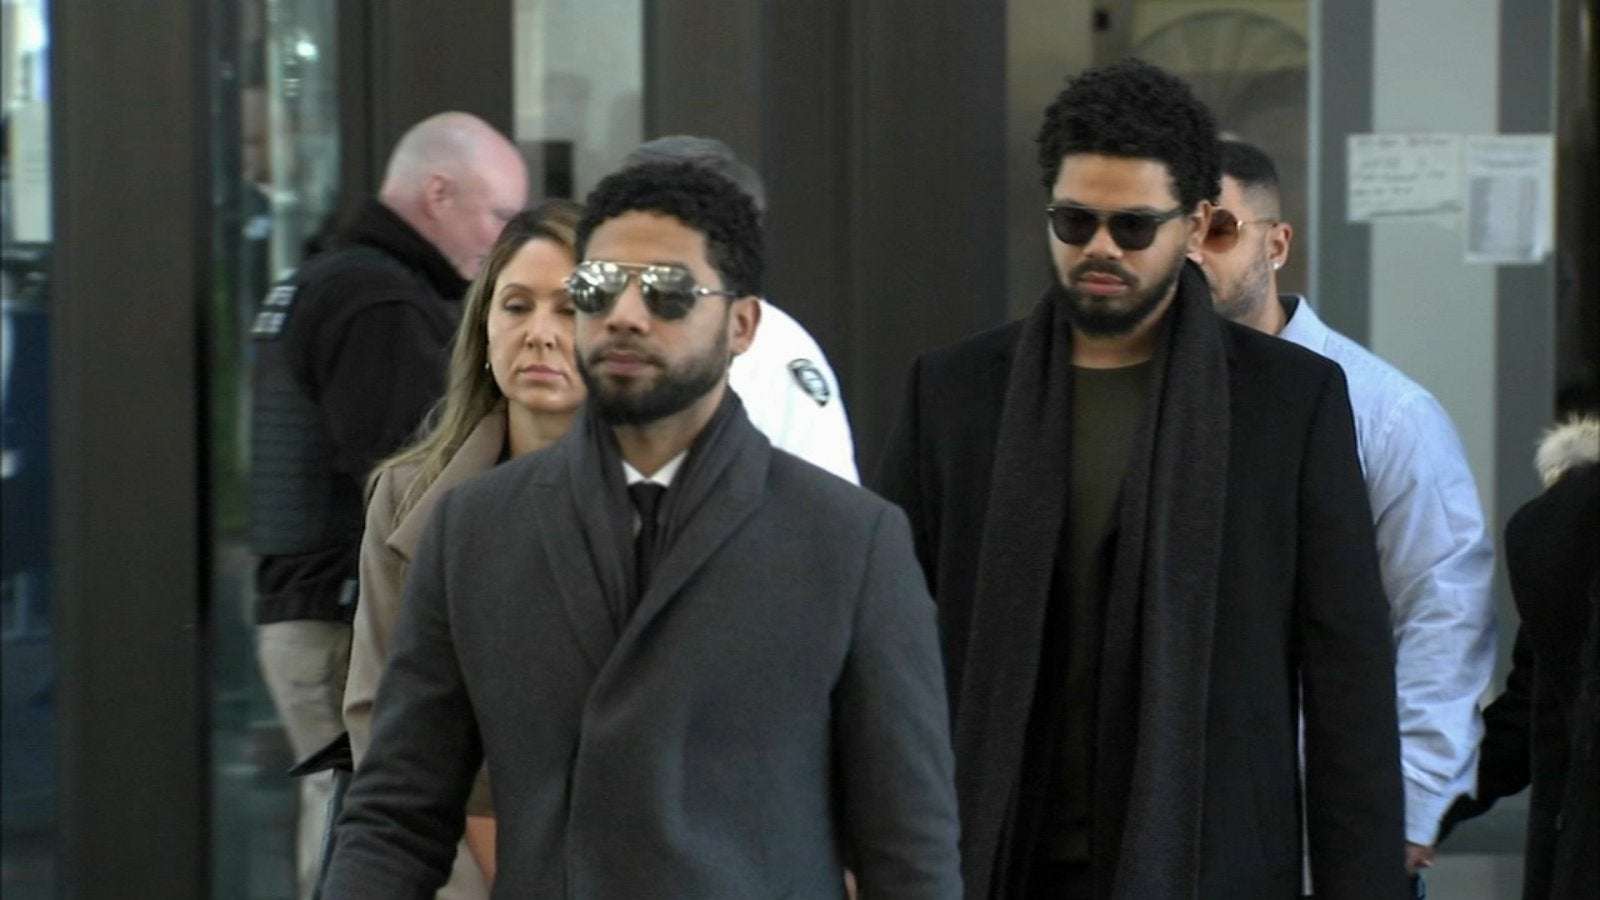 image for Jussie Smollett lawyers: Actor unaware alleged attack would trigger 'extensive investigation'